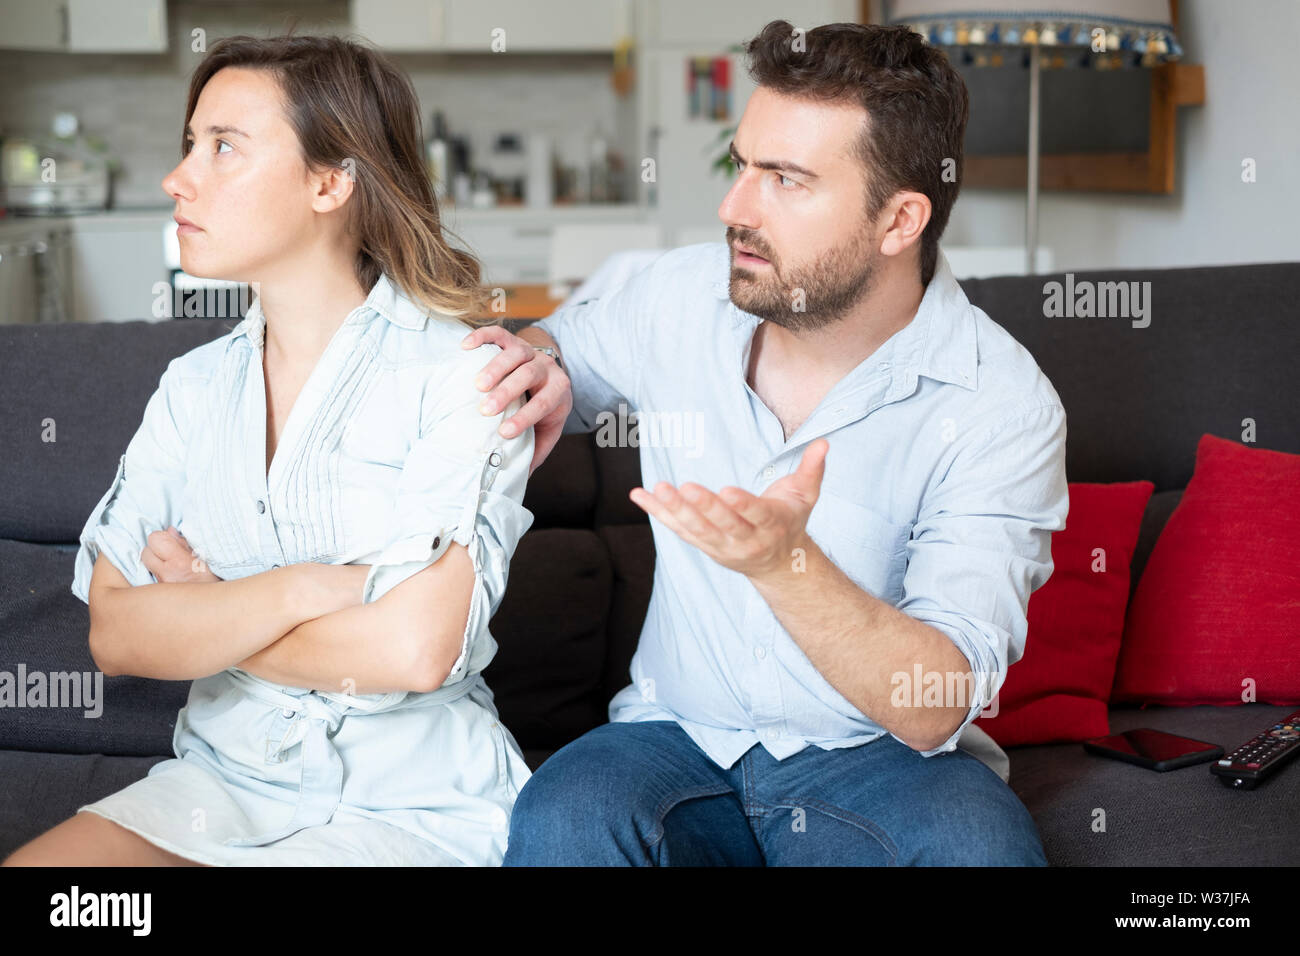 Relationship breakup and couple fighting badly Stock Photo